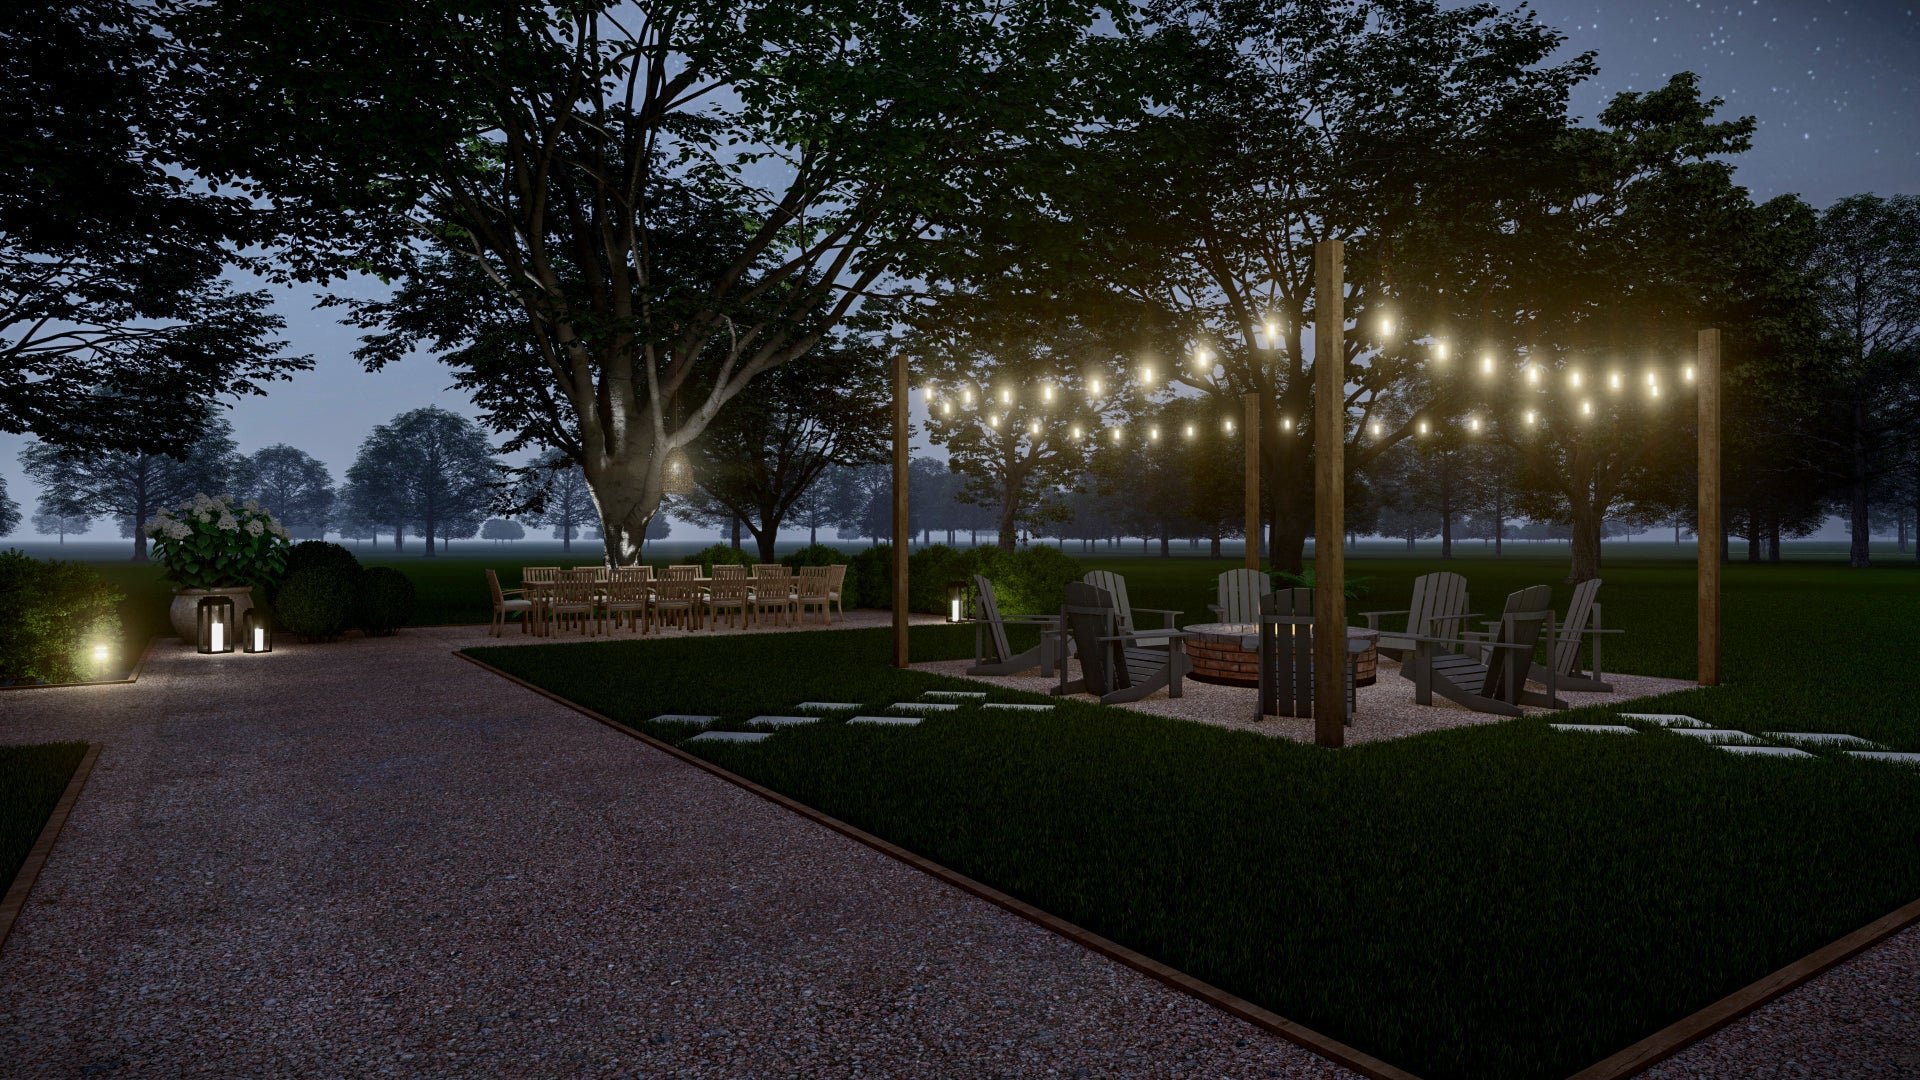 Decorative lanterns also mark the end of the path to the fire pit and outdoor dining zone. A square of string lights mounted to wooden posts defines the fire pit boundaries while leaving the space open to its surroundings.